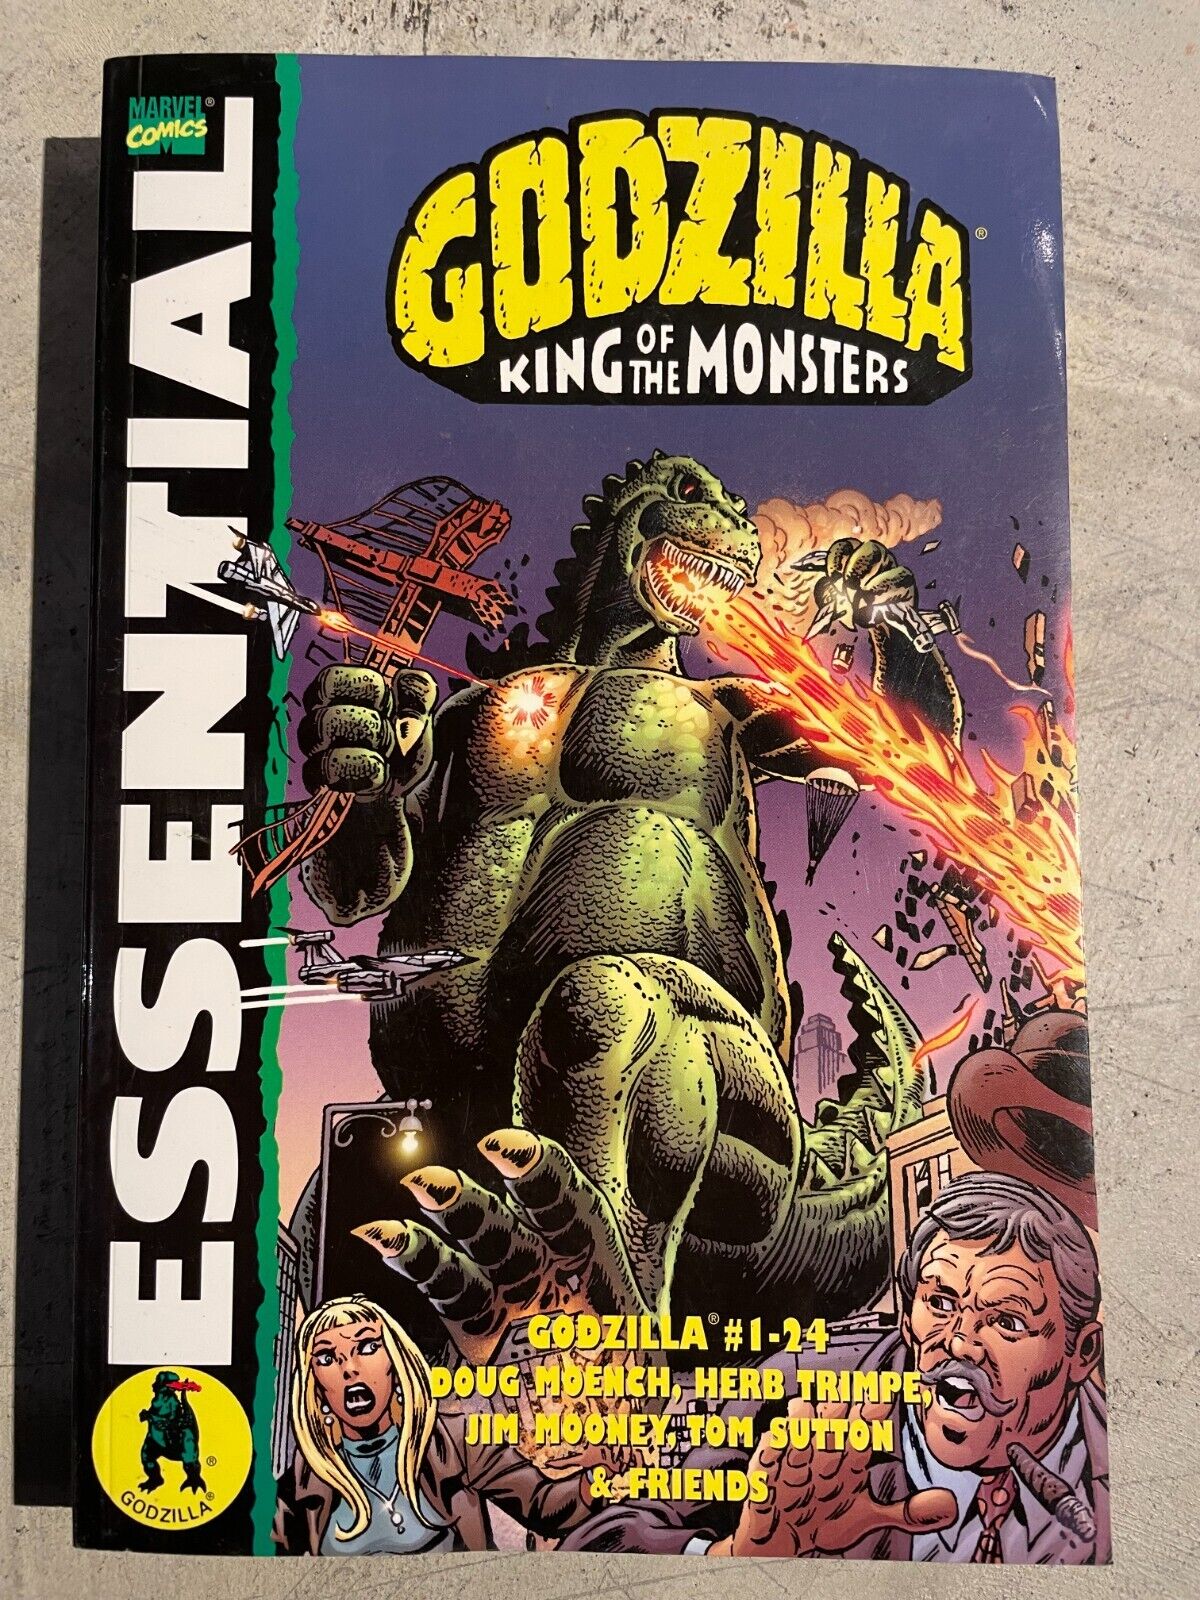 Essential Godzilla King of Monsters Complete Marvel #1-24 TPB OOP RARE NM-